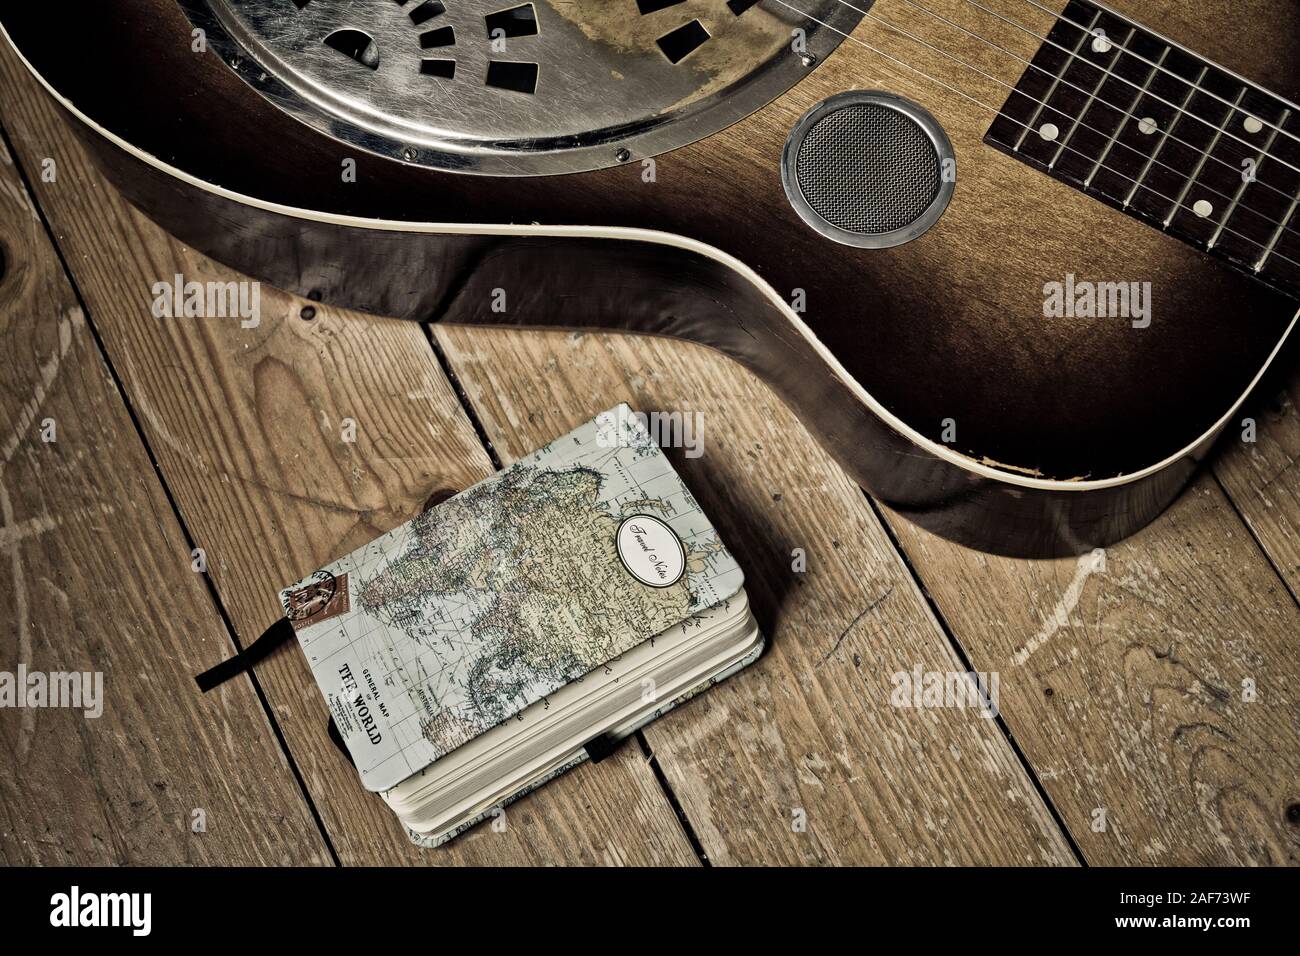 A Diary and a detail of a  Dobro guitar on a wooden background Stock Photo